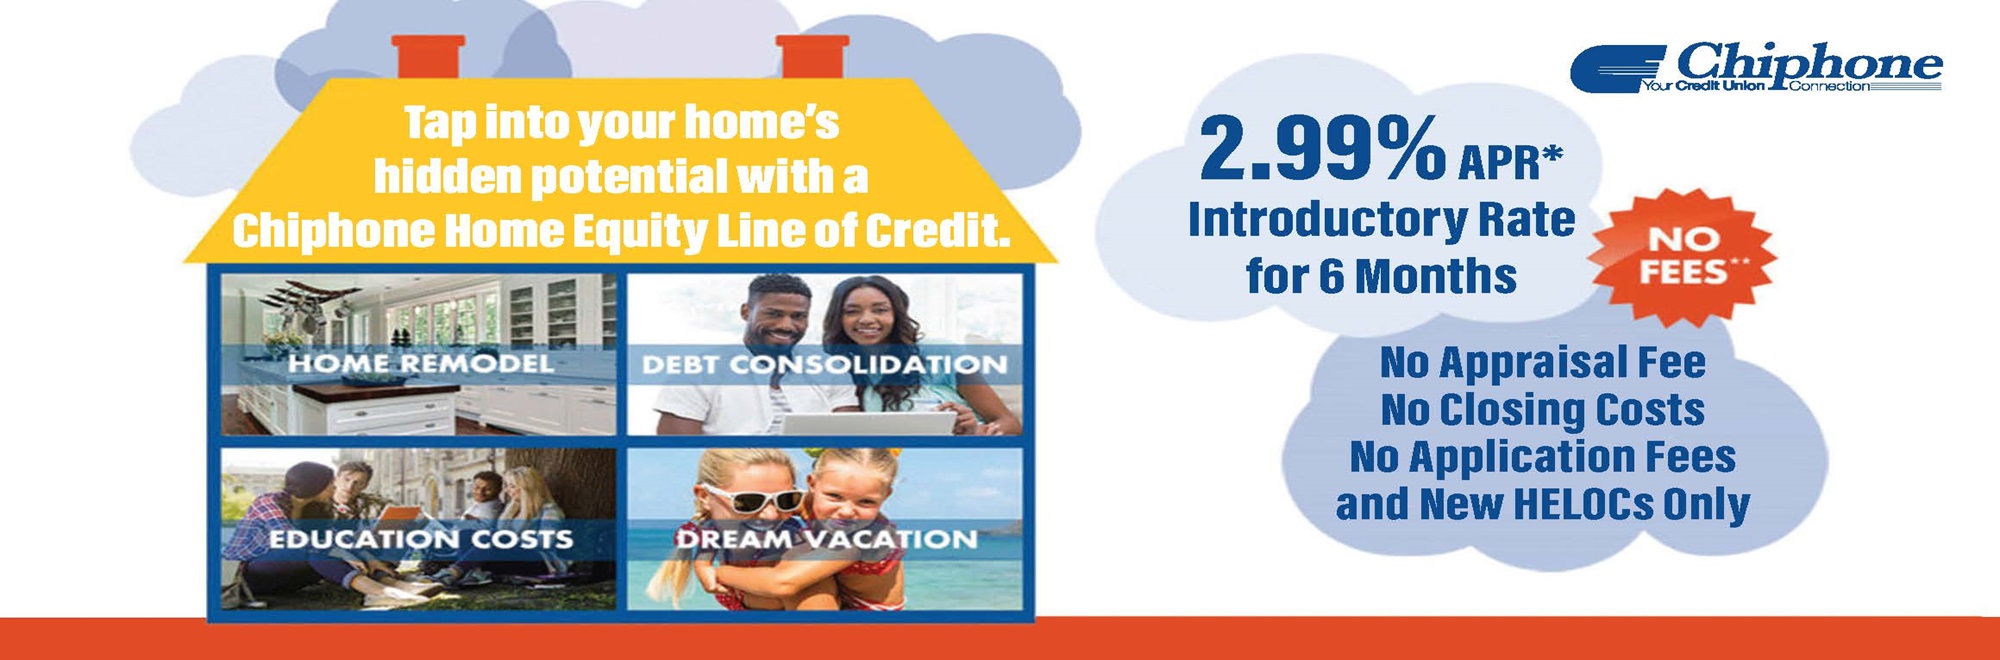 DO MORE WITH YOUR HOME EQUITY LINE OF CREDIT (HELOC) PROMOTION!